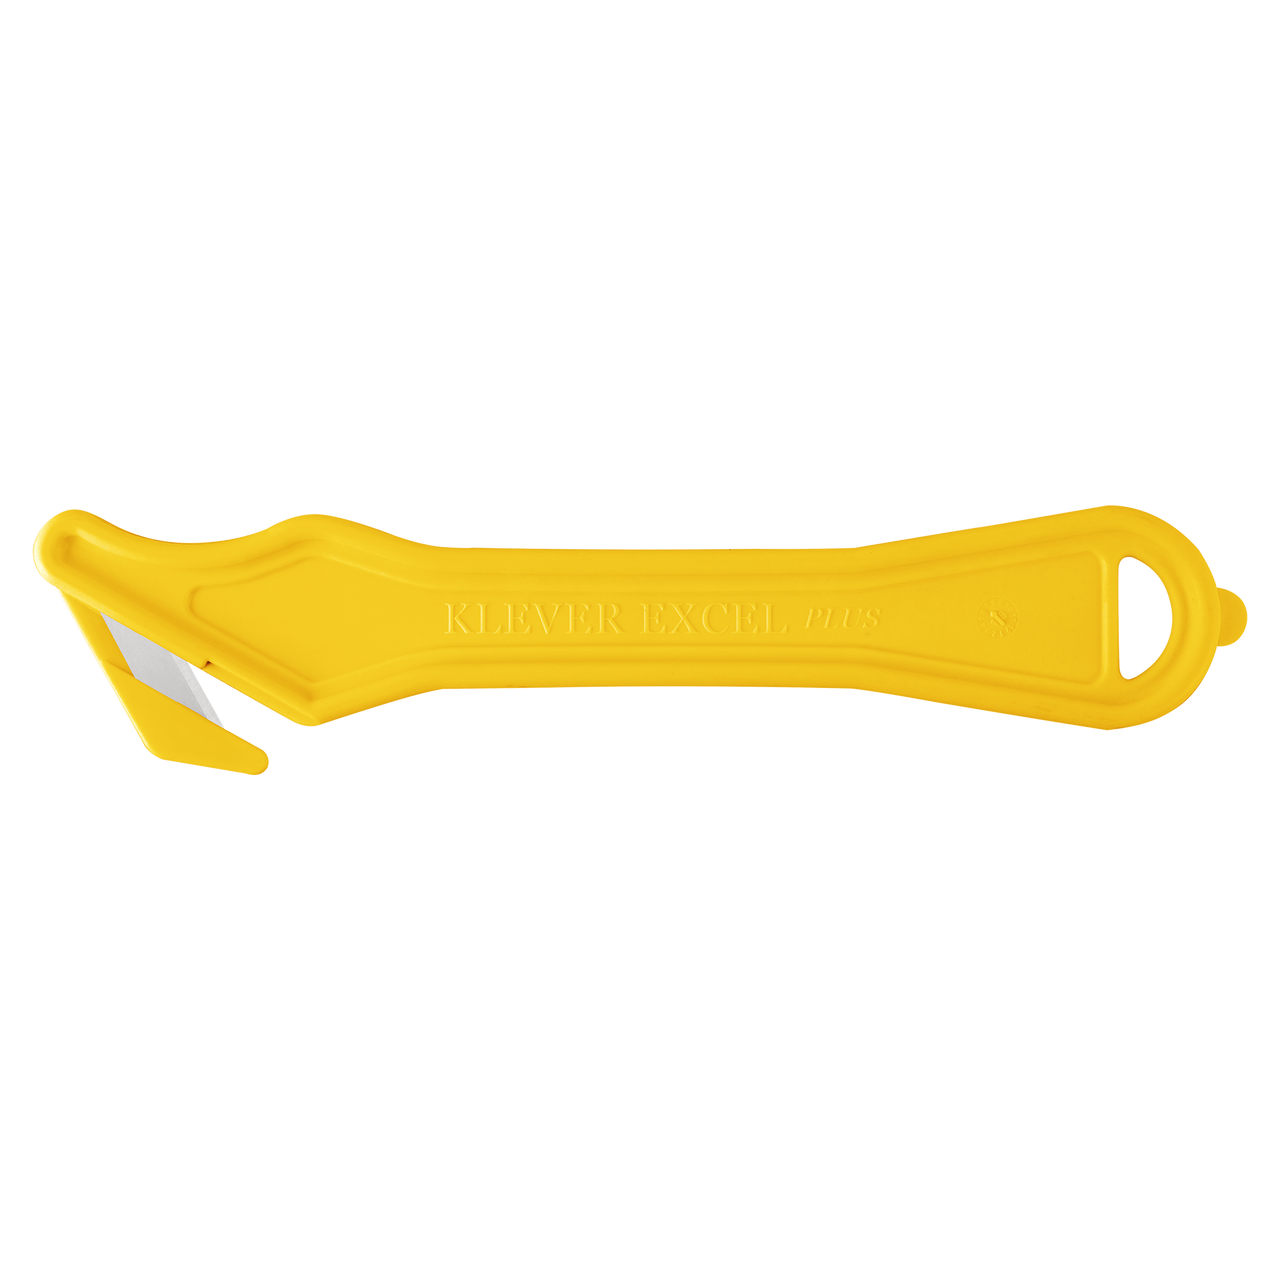 Klever Kutter Excel Yellow Protective Box Cutter with Wide Head